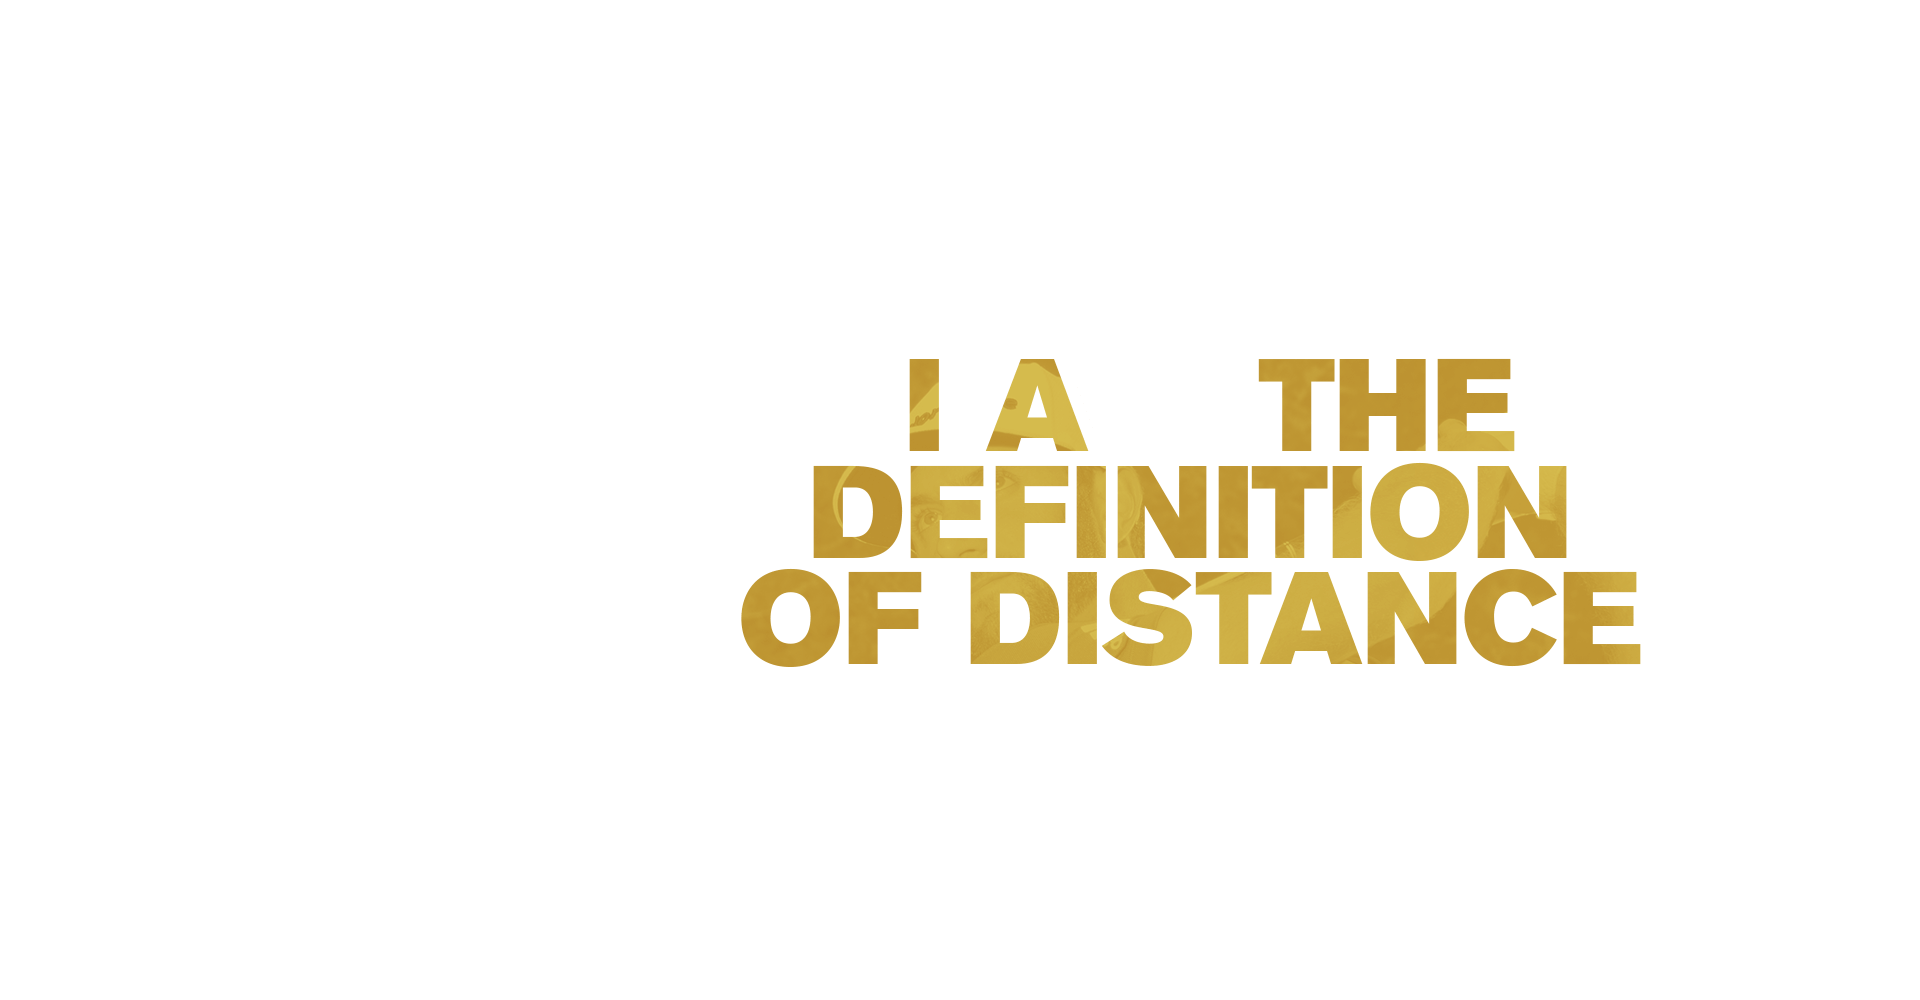 I am the definition of distance